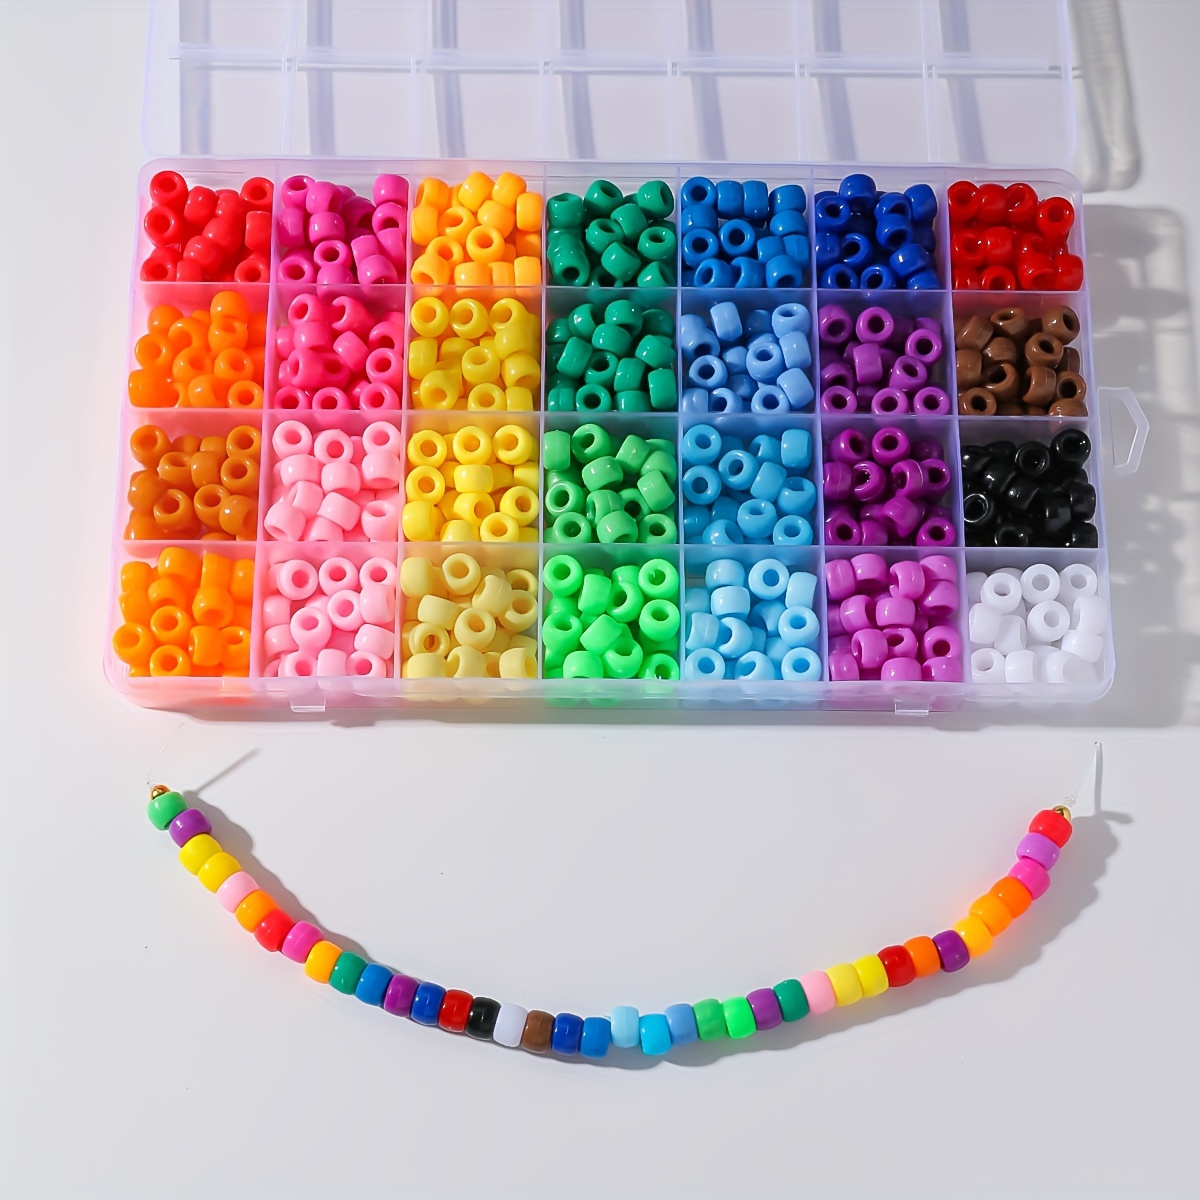 

700-piece Acrylic Beads Assortment - 6x9mm Colorful Bead Kit With Large Hole For Jewelry Making, Bracelets, Necklaces, Keychains, Crafts - 28 Variety Colors